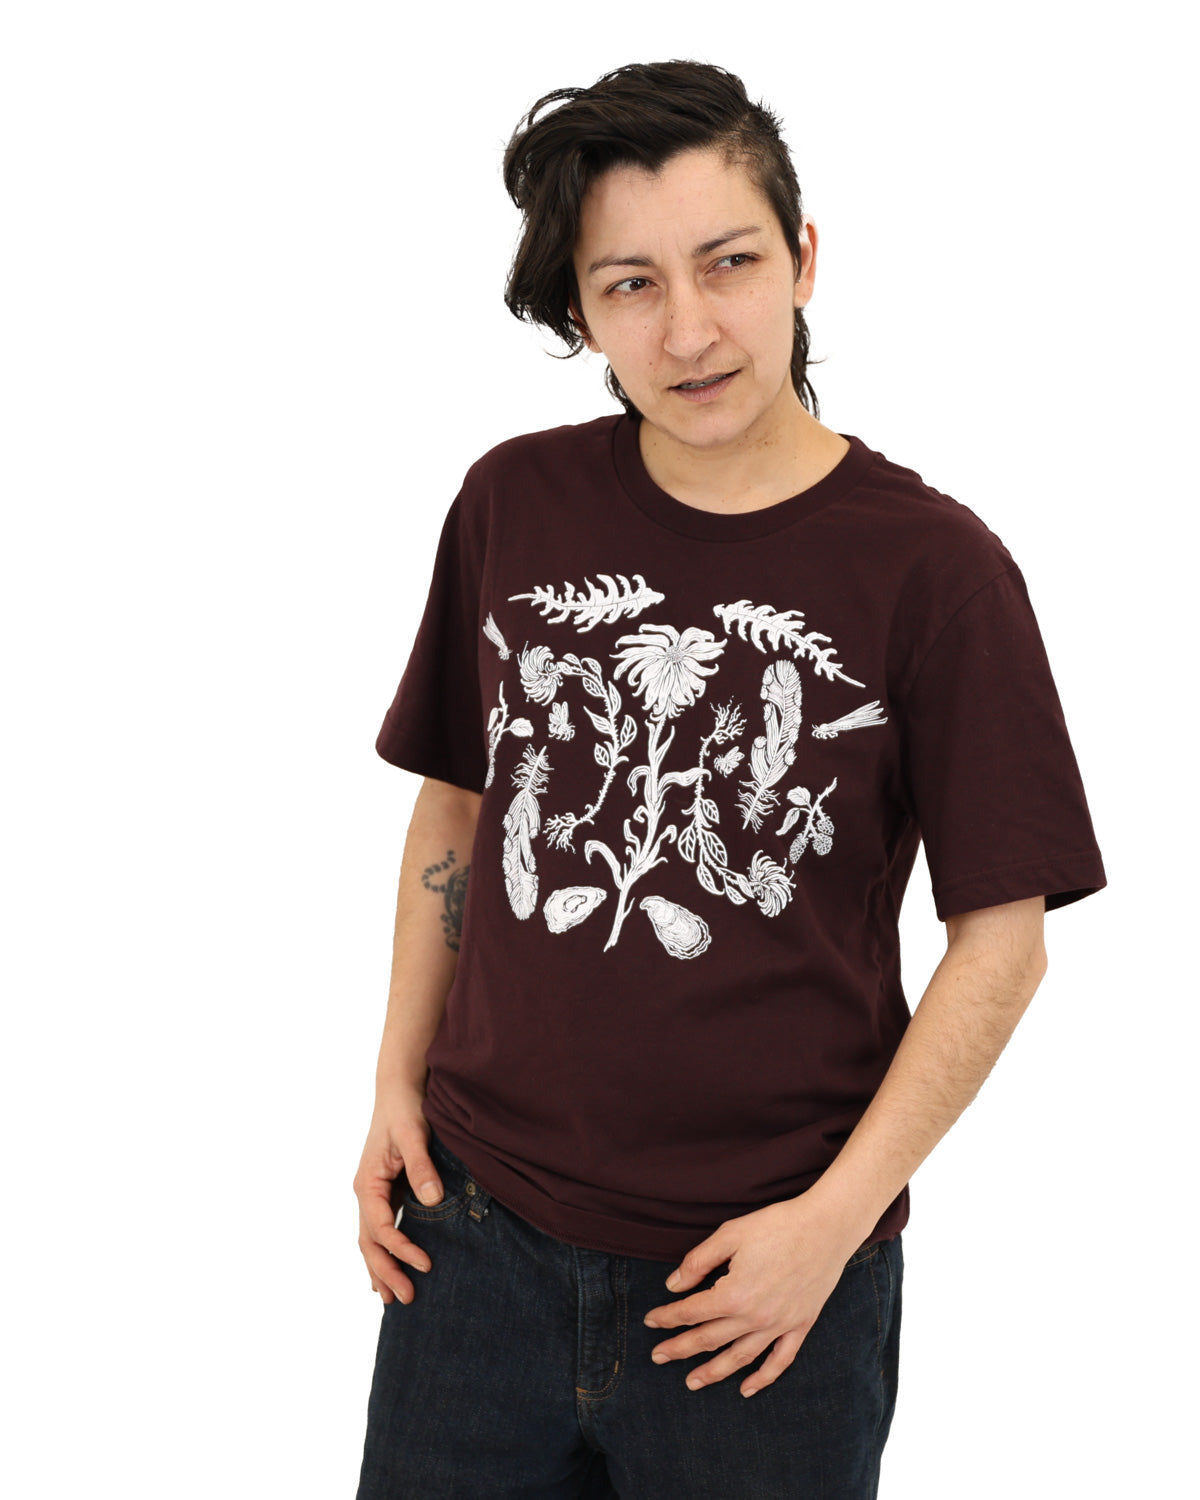 Woman wearing a oxblood colored t-shirt with white ink of flowers, ferns, feathers, shells, etc